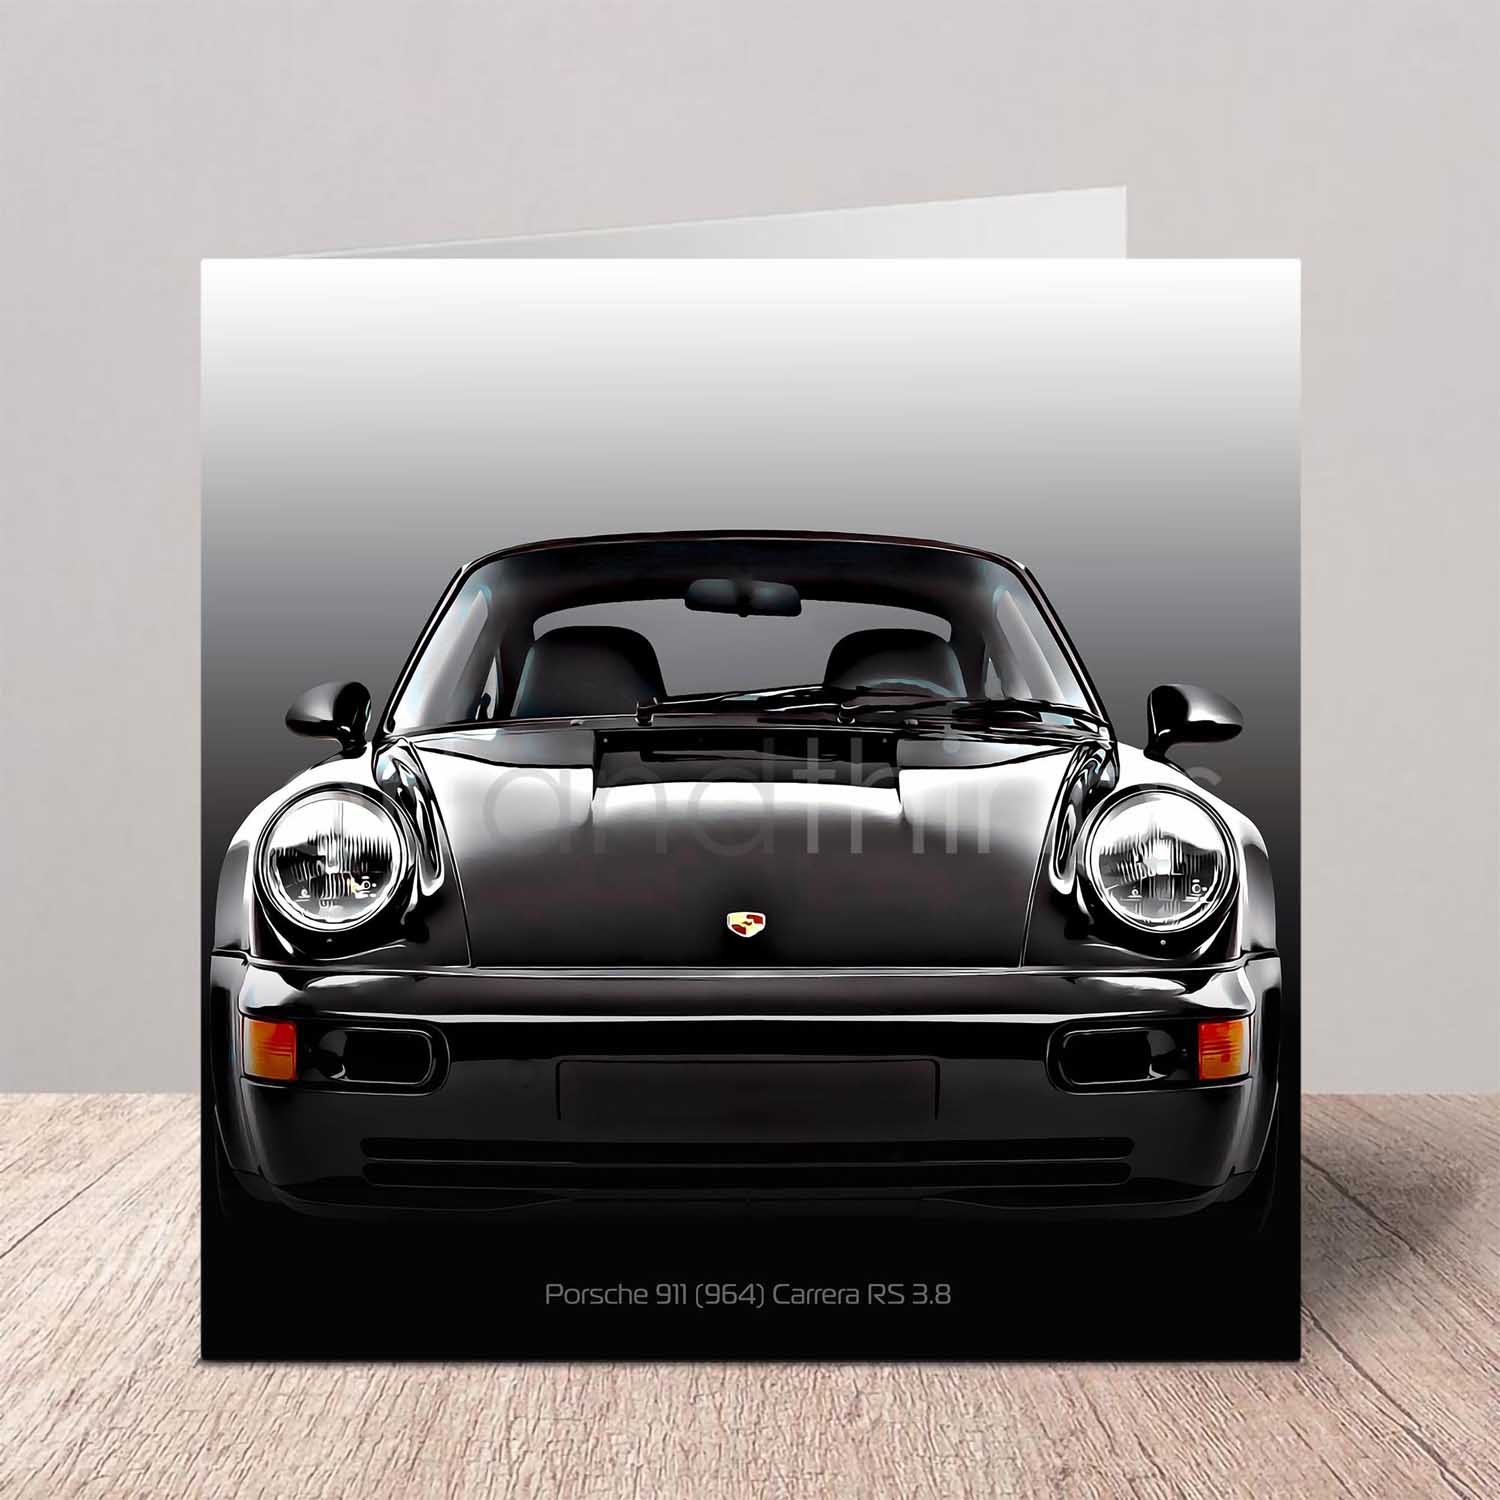 Porsche 911 964 3.8 RS Front View Greeting Card